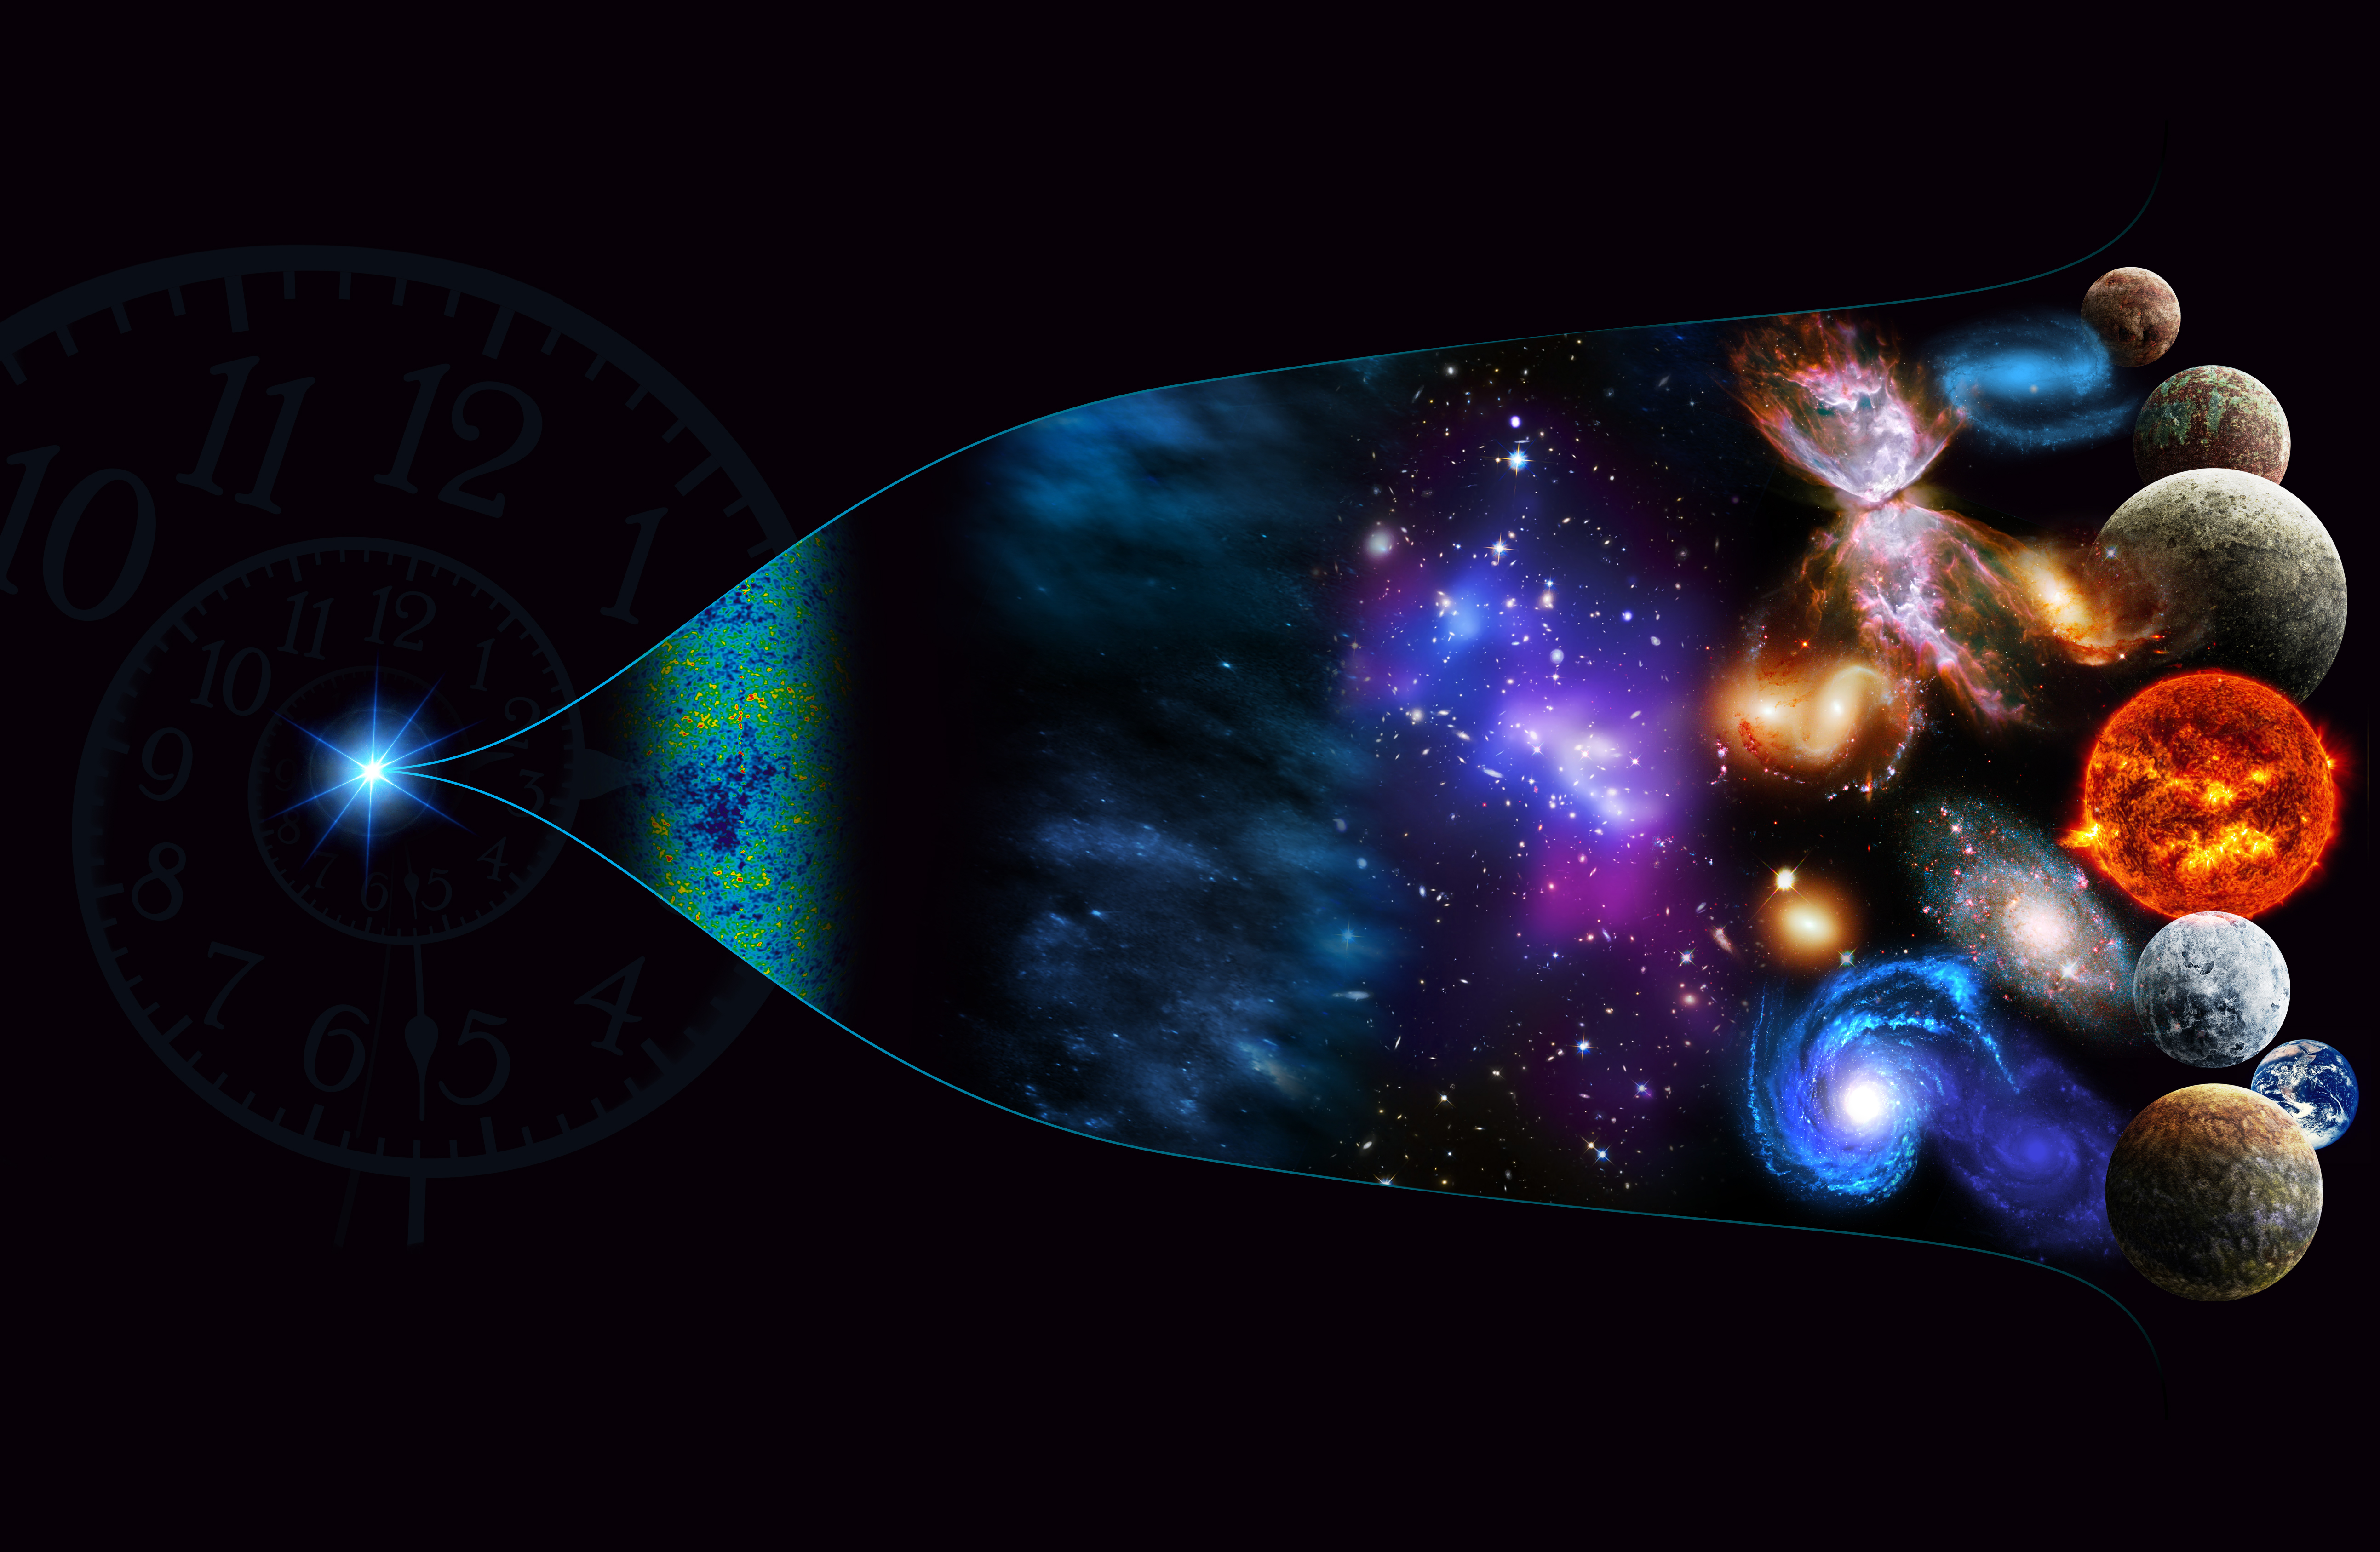 Illustration to show the Big Bang from spark of light into galaxies, planets, etc.